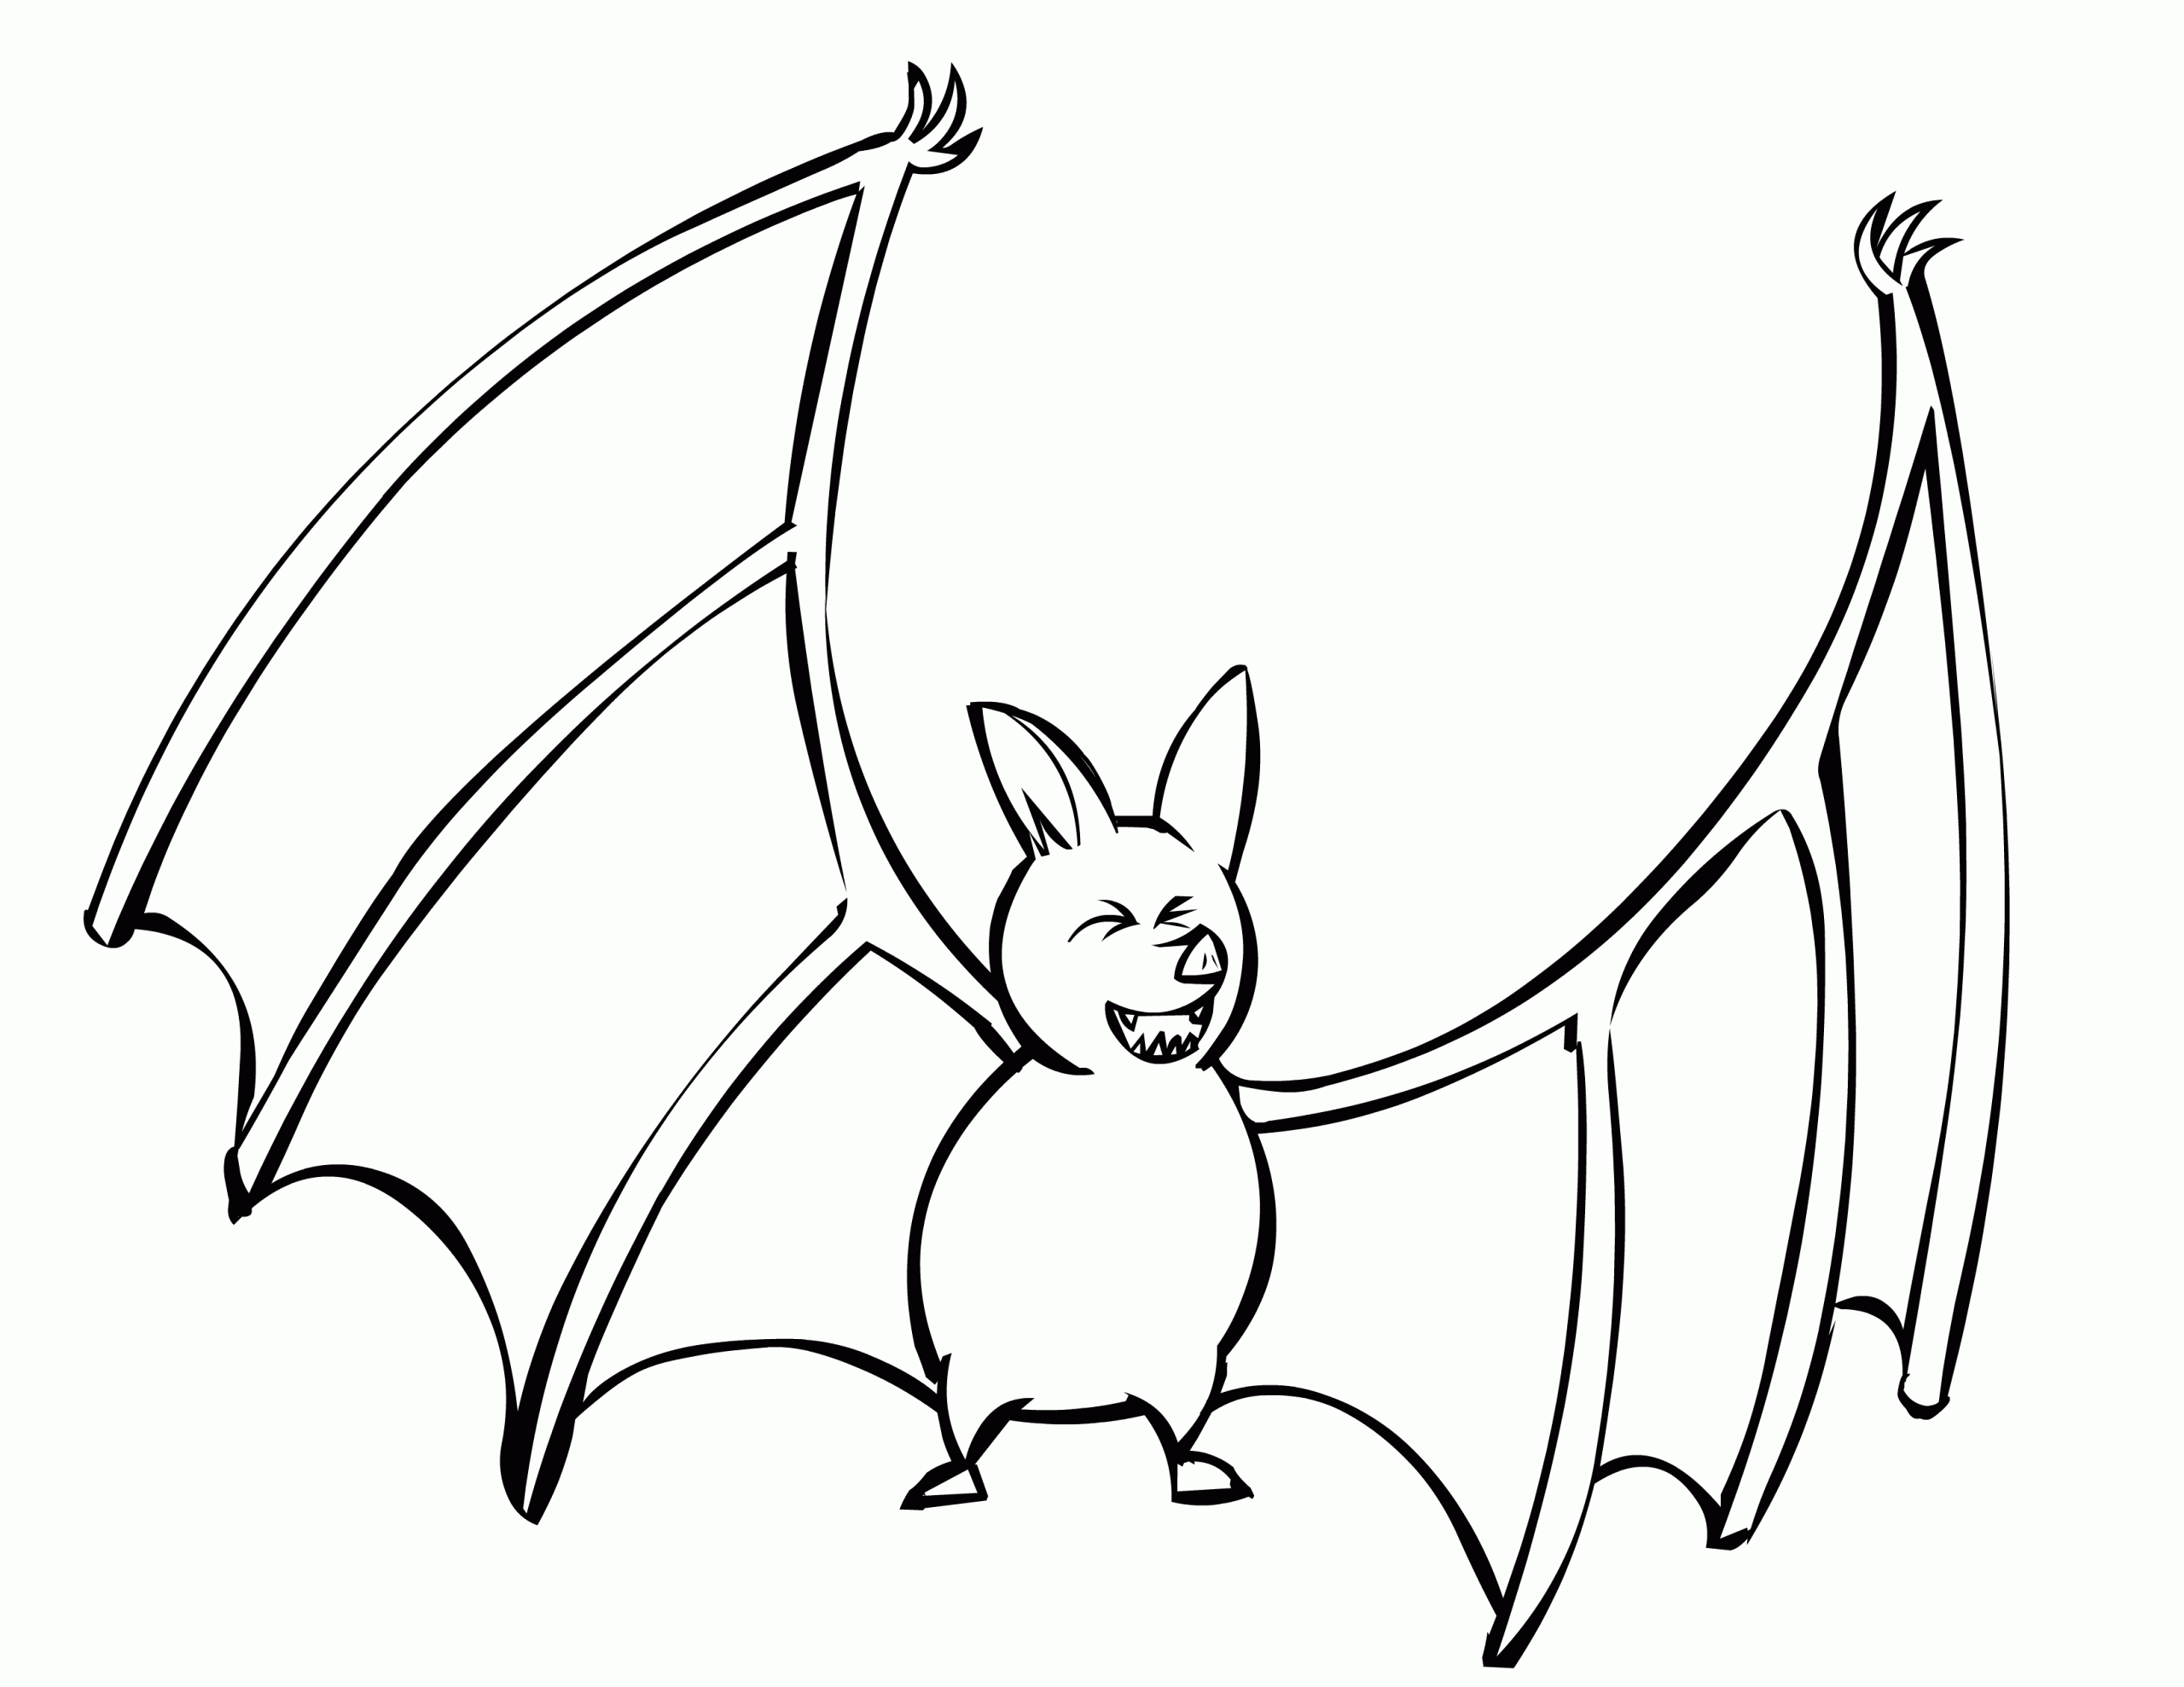 Bat Coloring Page For Us Coloring Page